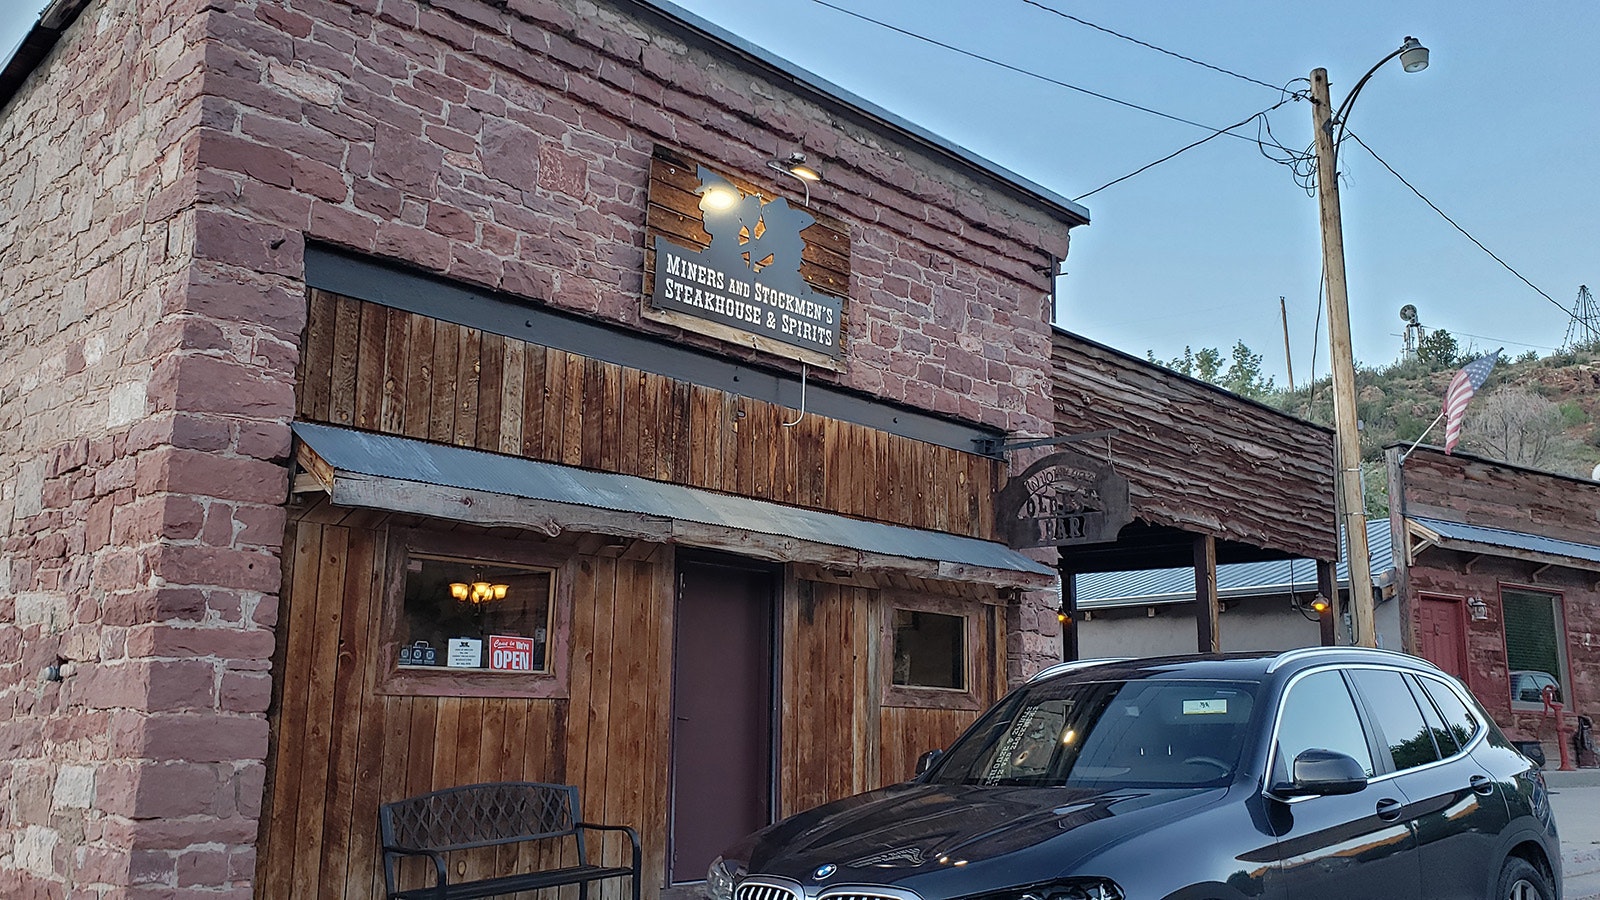 The legendary Miners and Stockmen's Steakhouse and Spirits in Hartville, Wyoming.